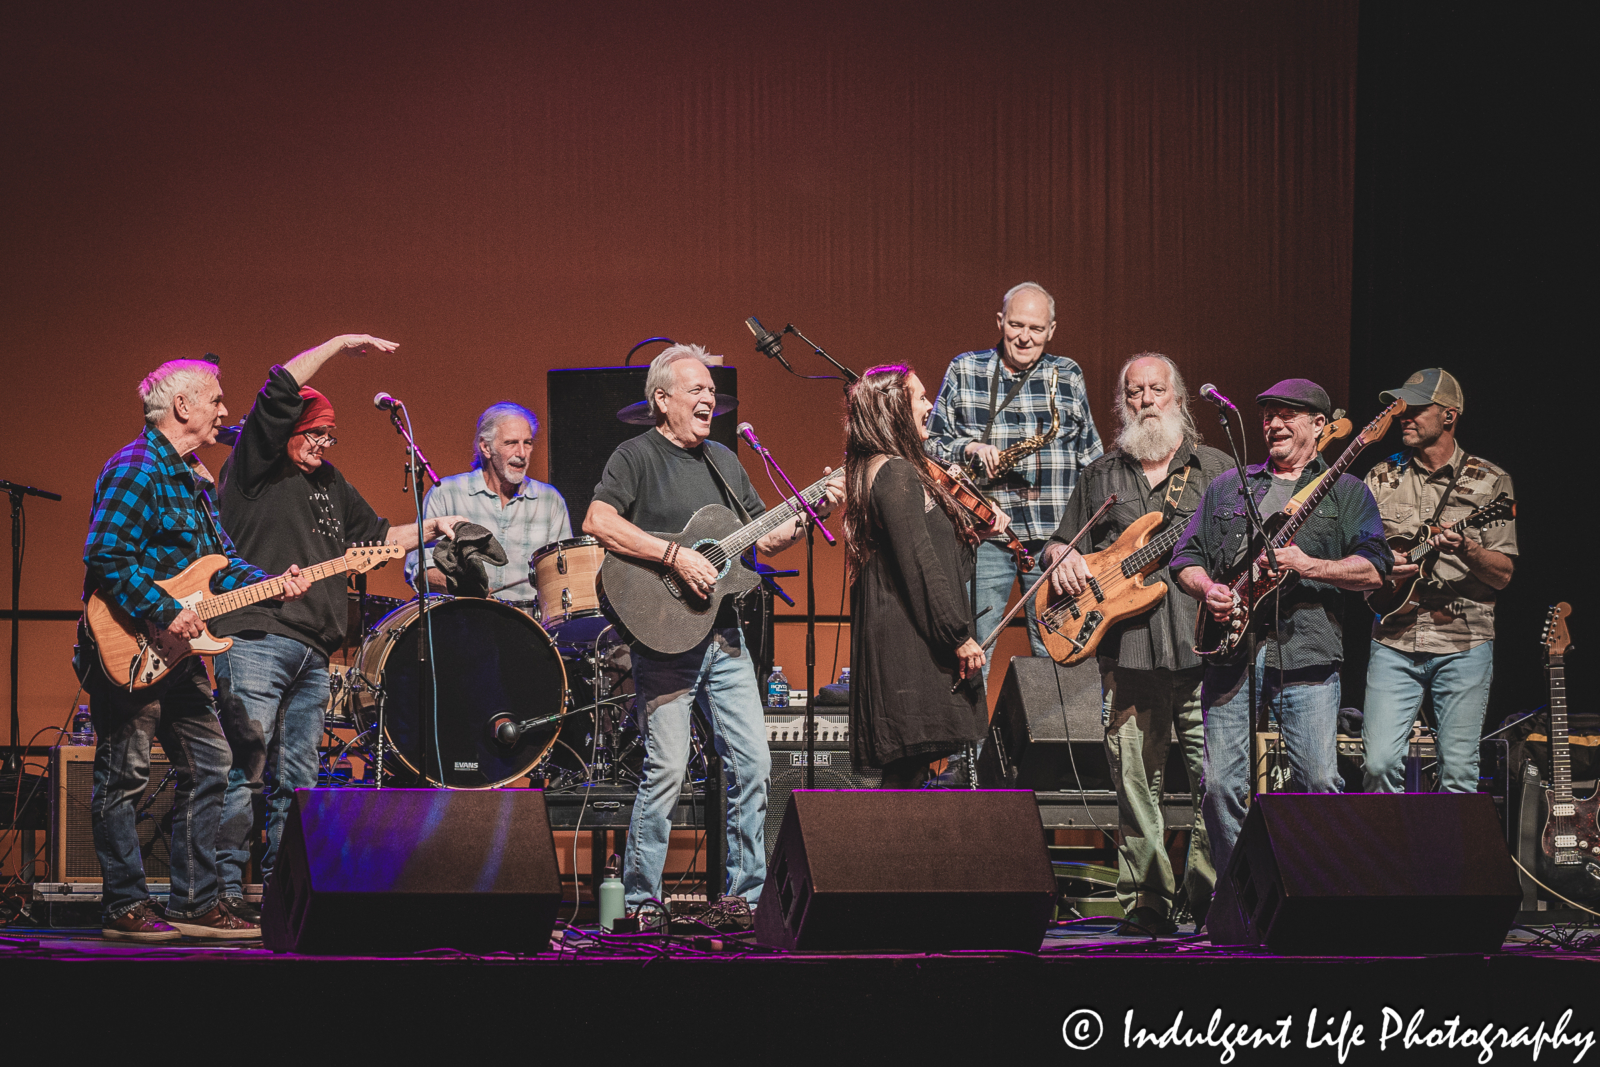 Star Pavilion live concert performance at Ameristar Casino in Kansas City, MO featuring The Ozark Mountain Daredevils on November 11, 2023.